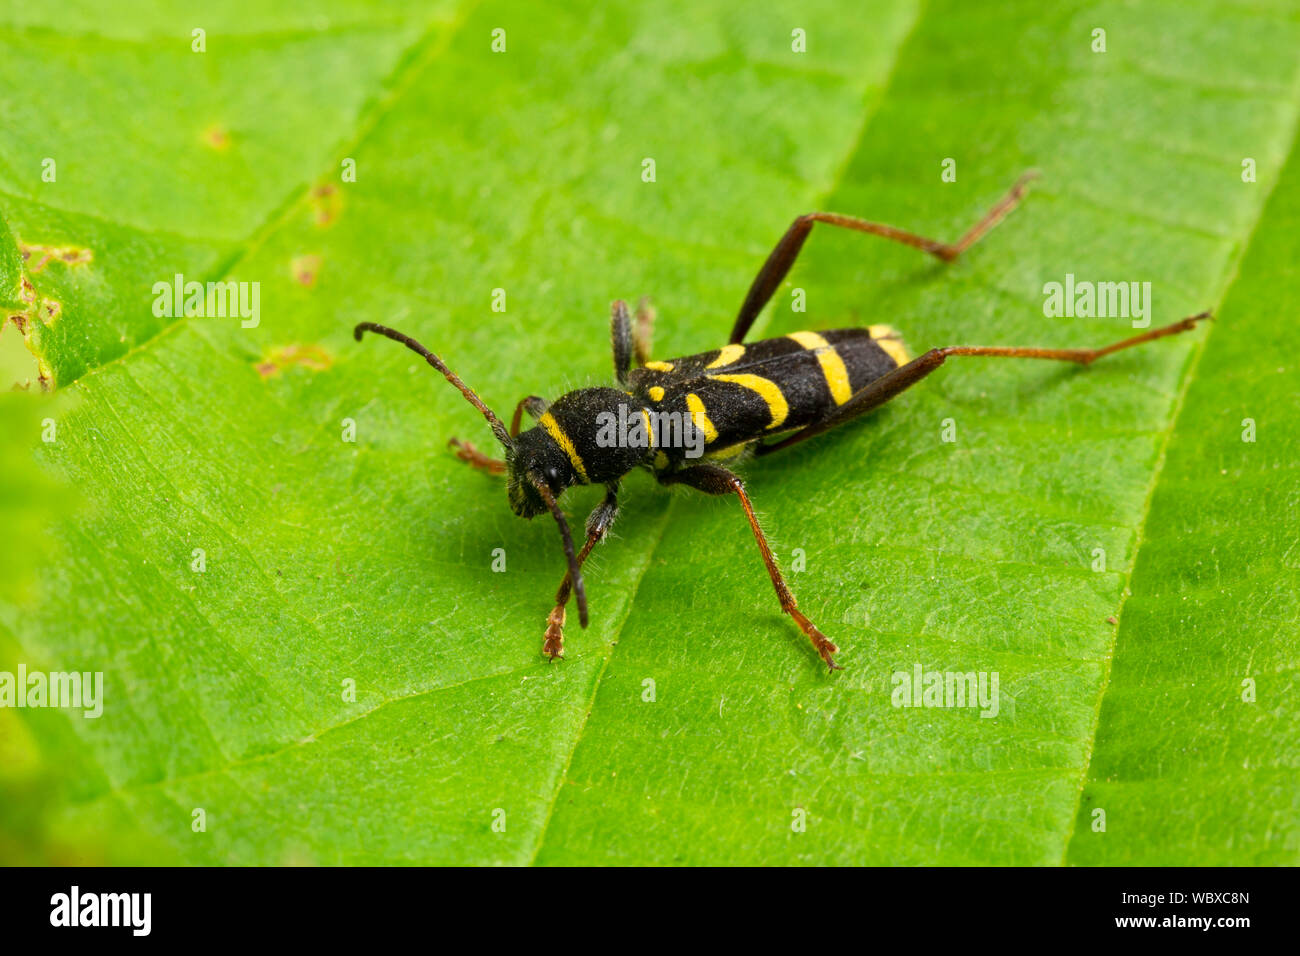 Wasp Beetle, Clytus arietis, a member of the long-horn beetle family, Cerambycidae. Catbrook, Monmouthshire, Wales Stock Photo